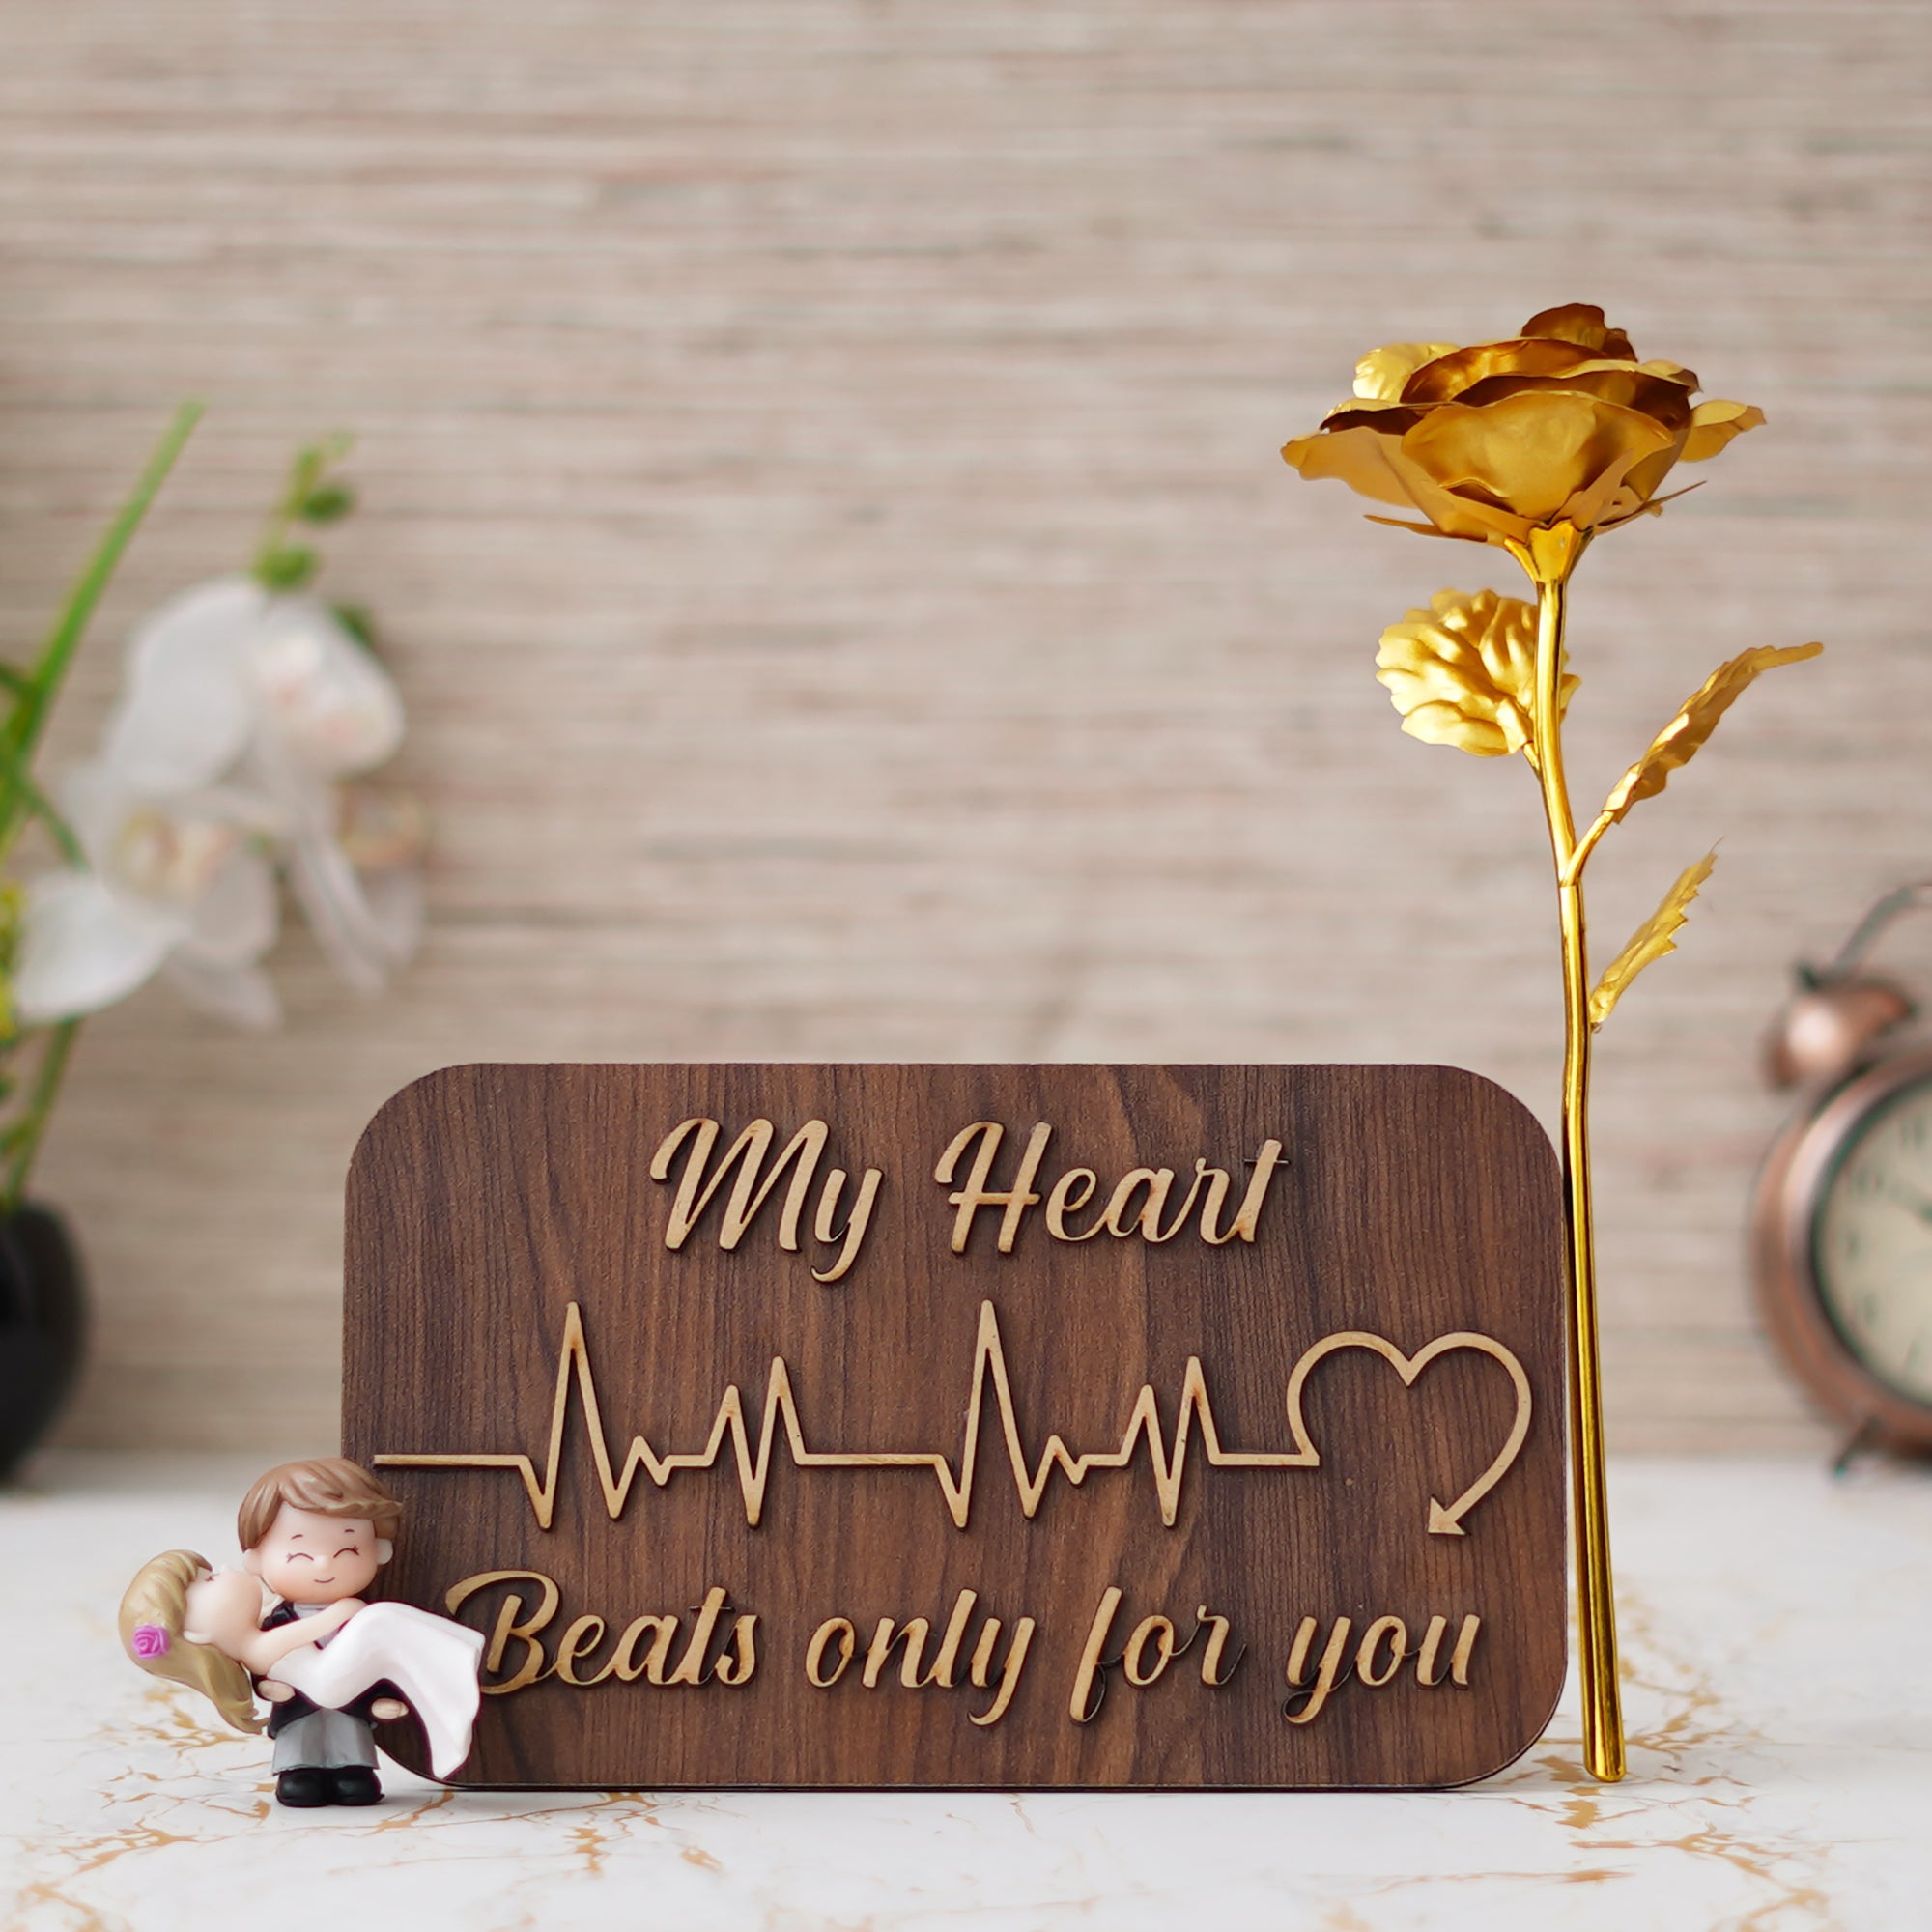 Valentine Combo of Golden Rose Gift Set, "My Heart Beats Only For You" Wooden Showpiece With Stand, Bride Kissing Groom Romantic Polyresin Decorative Showpiece